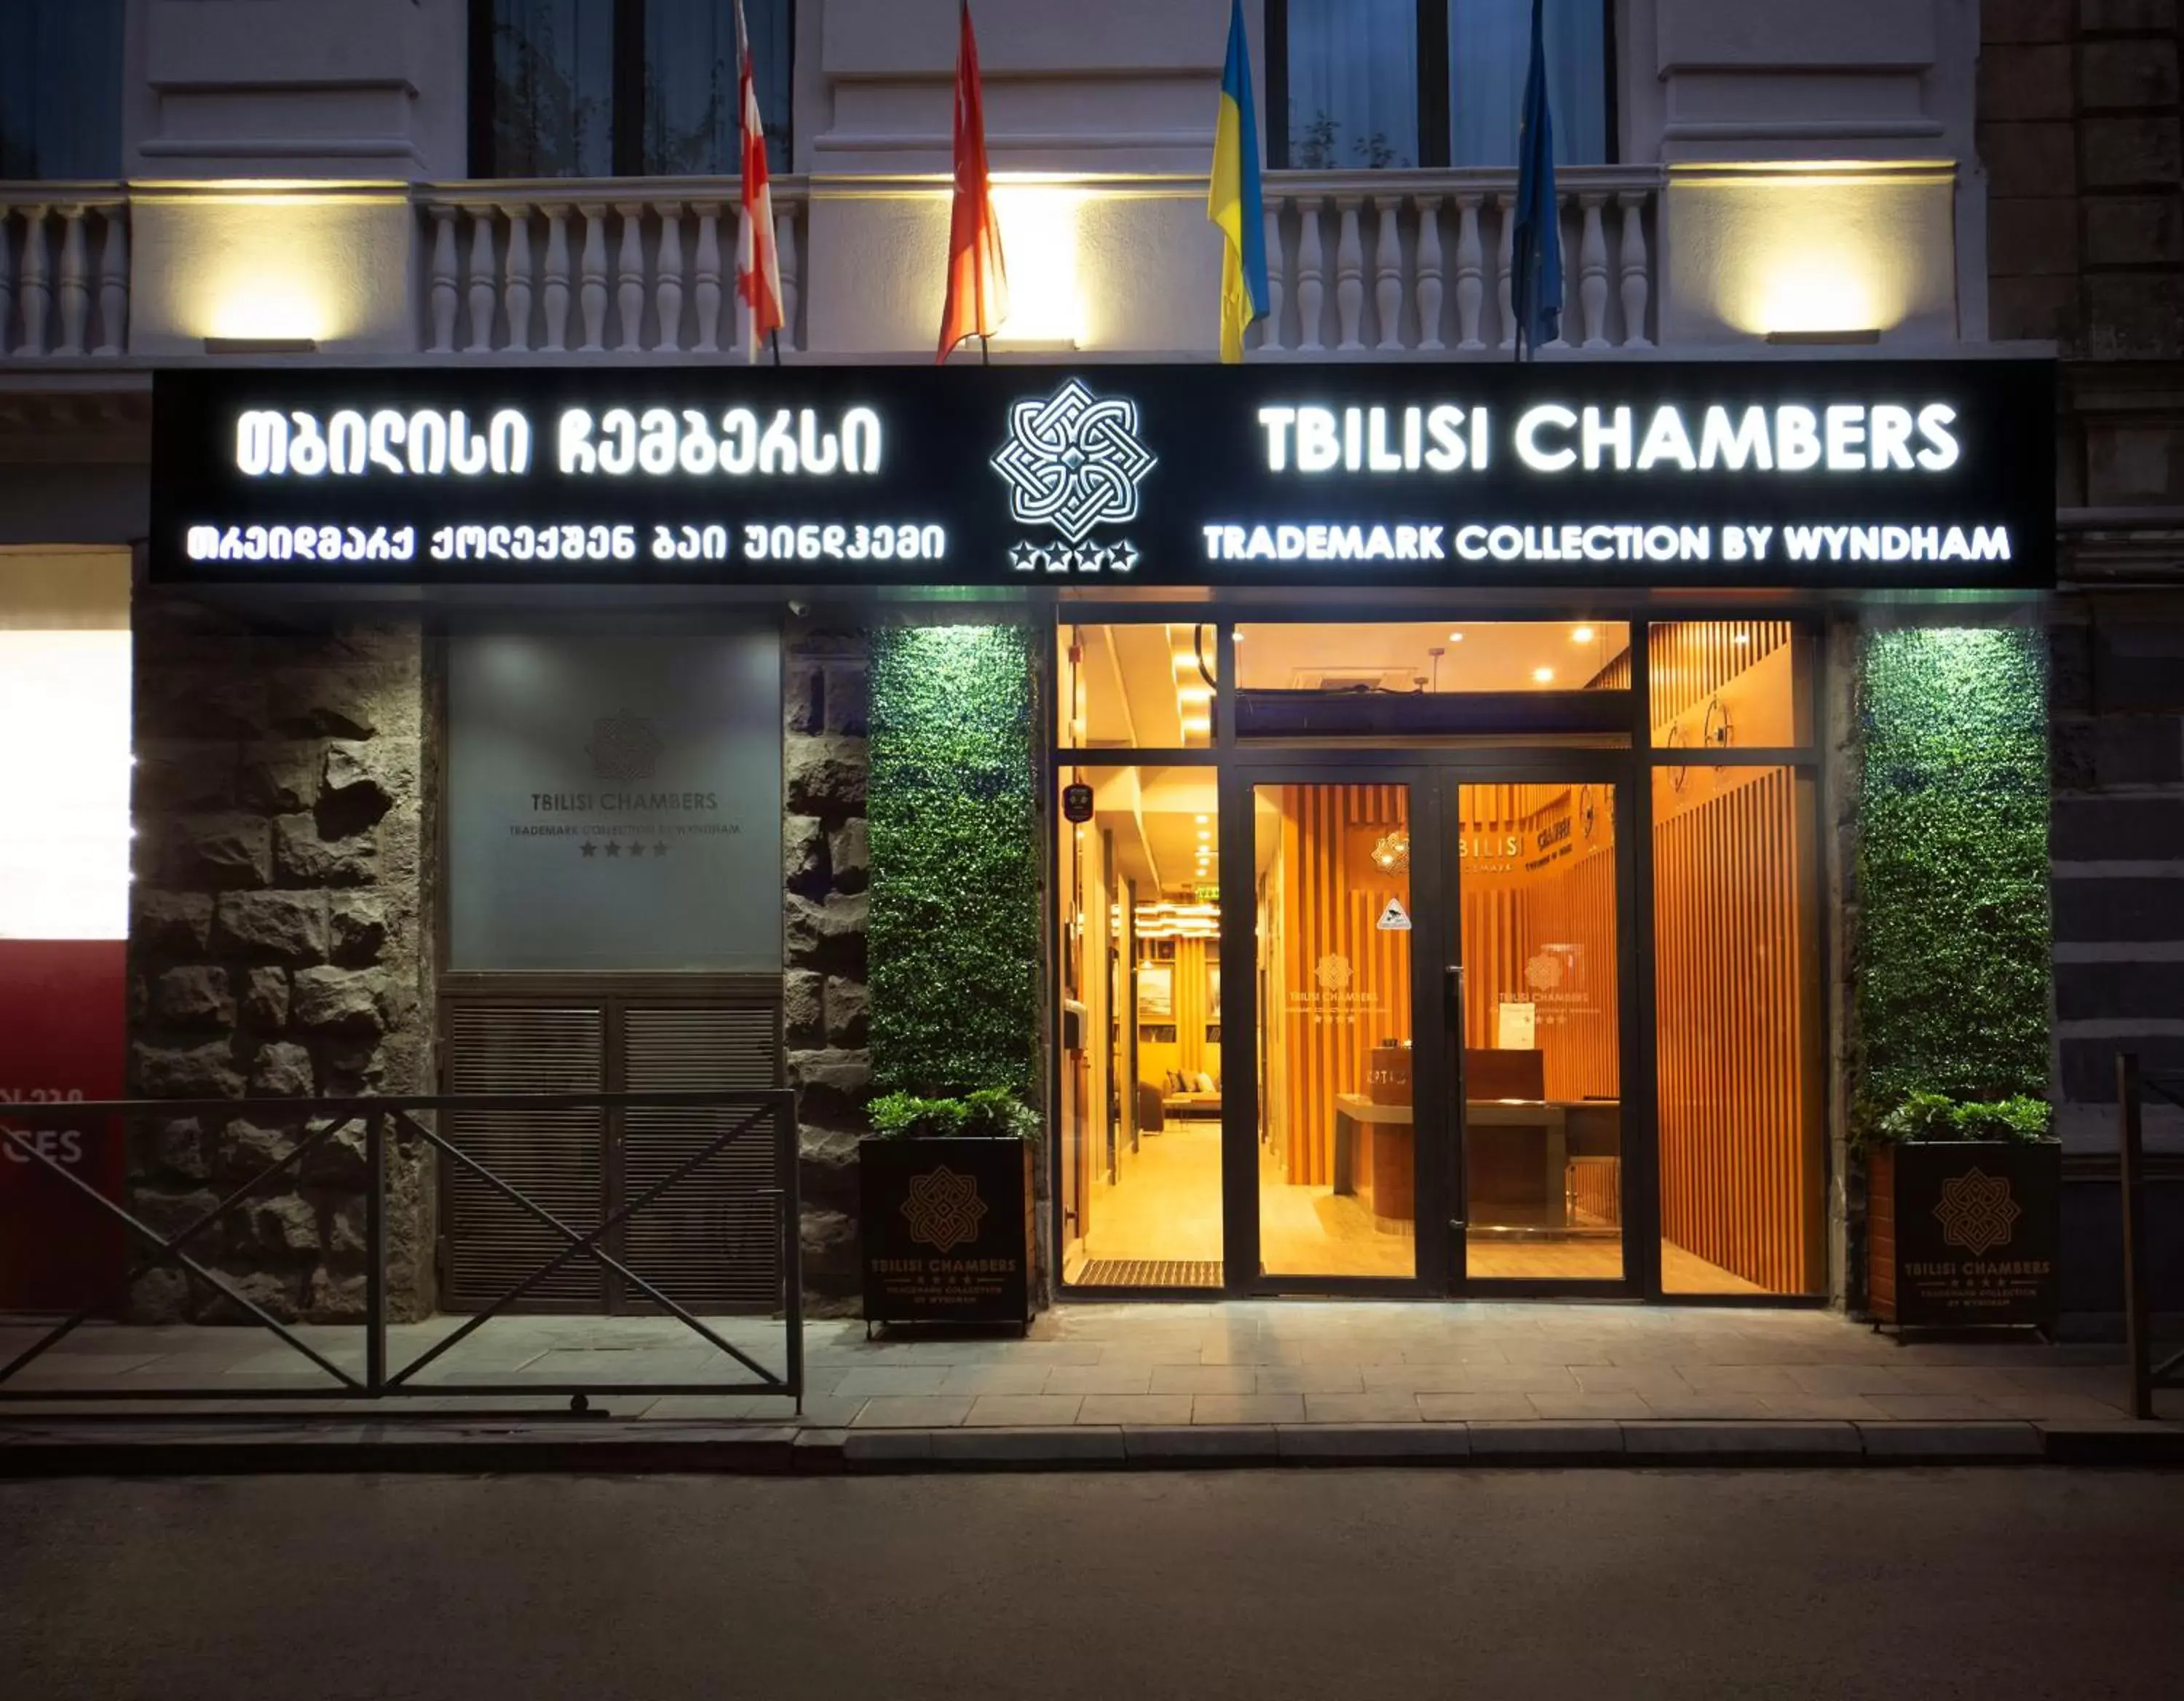 Night in Tbilisi Chambers, Trademark Collection by Wyndham